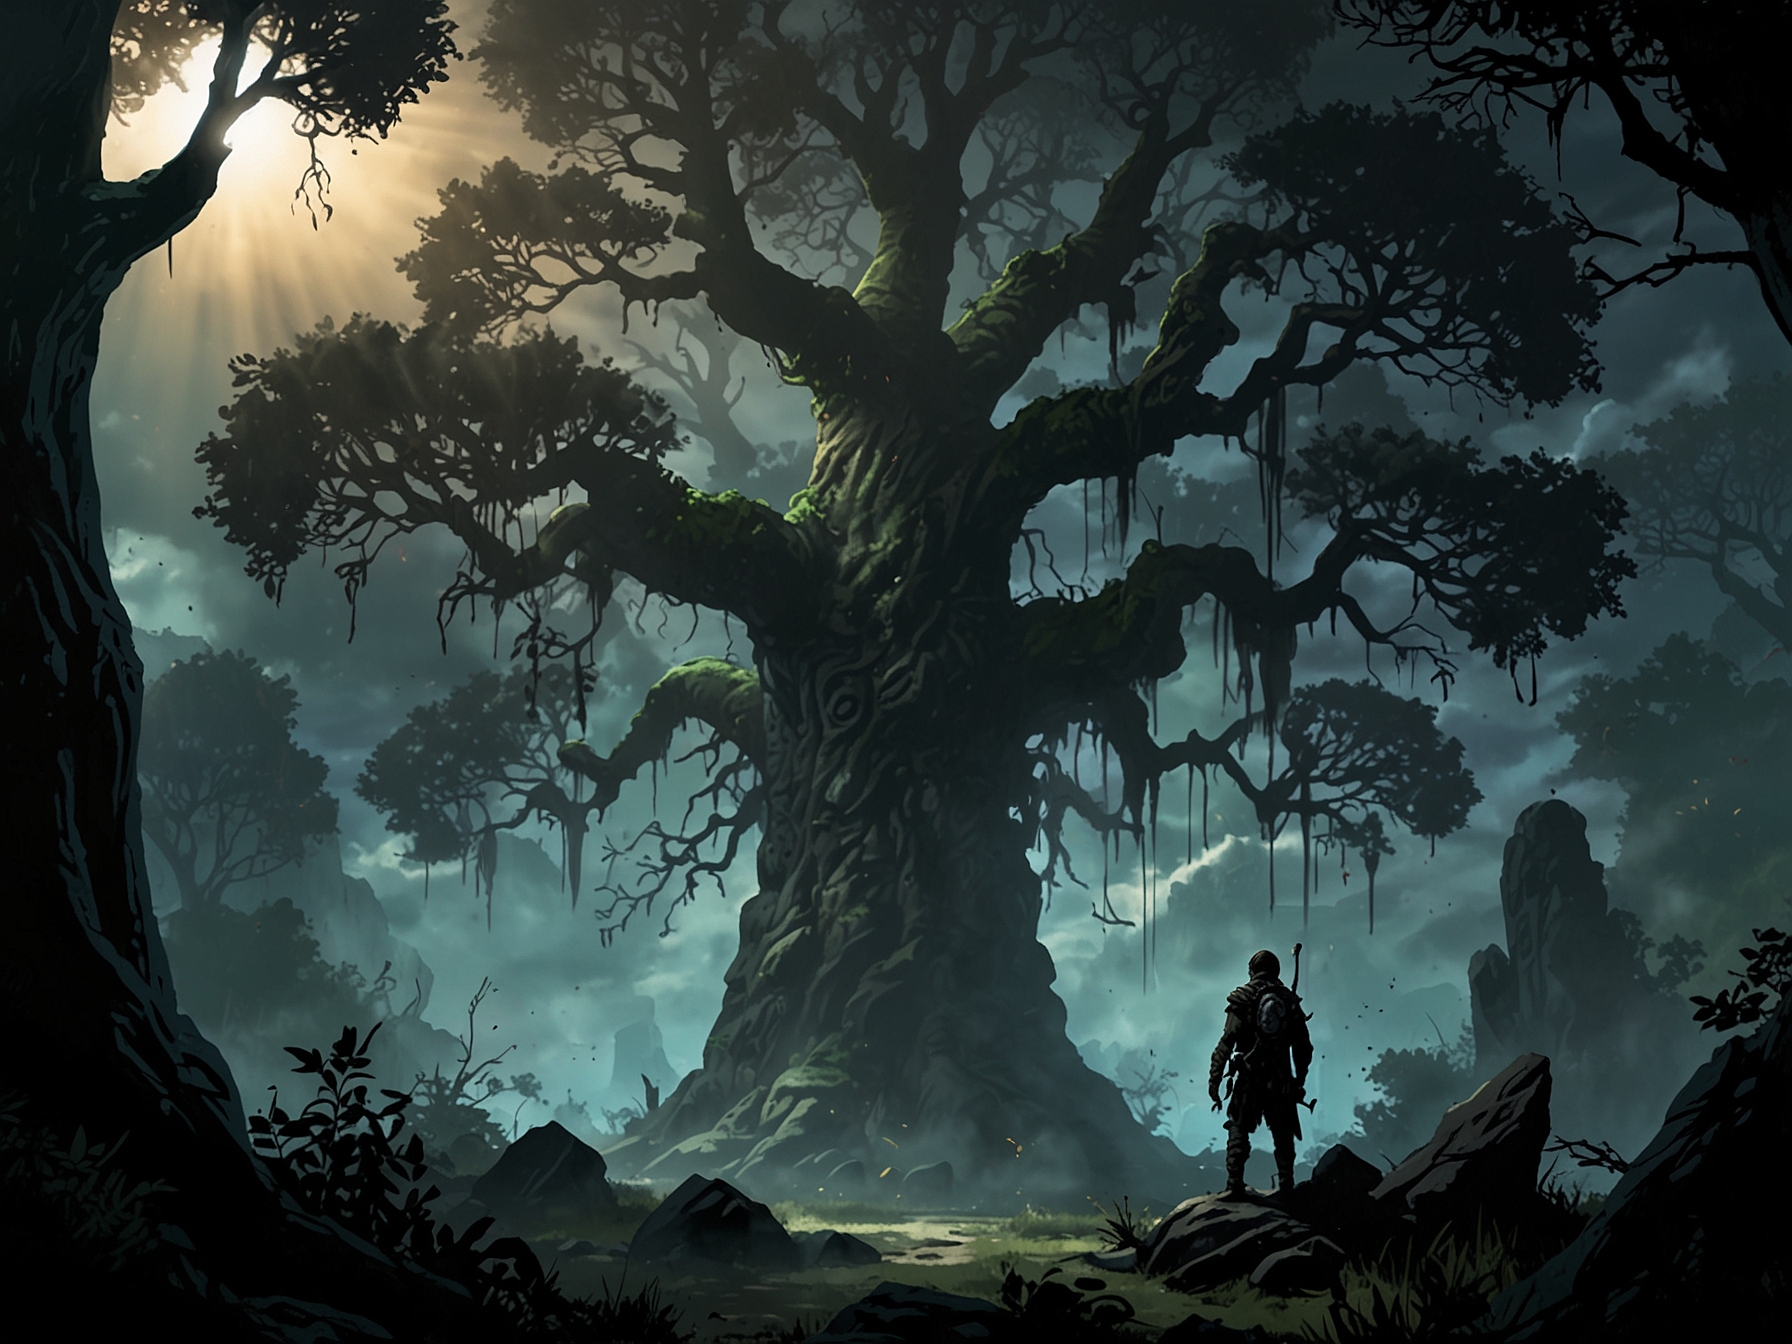 An illustration of an adventurer standing before the towering, mystical Erdtree, symbolizing the new depths of lore and exploration introduced in the 'Shadow of the Erdtree' expansion.